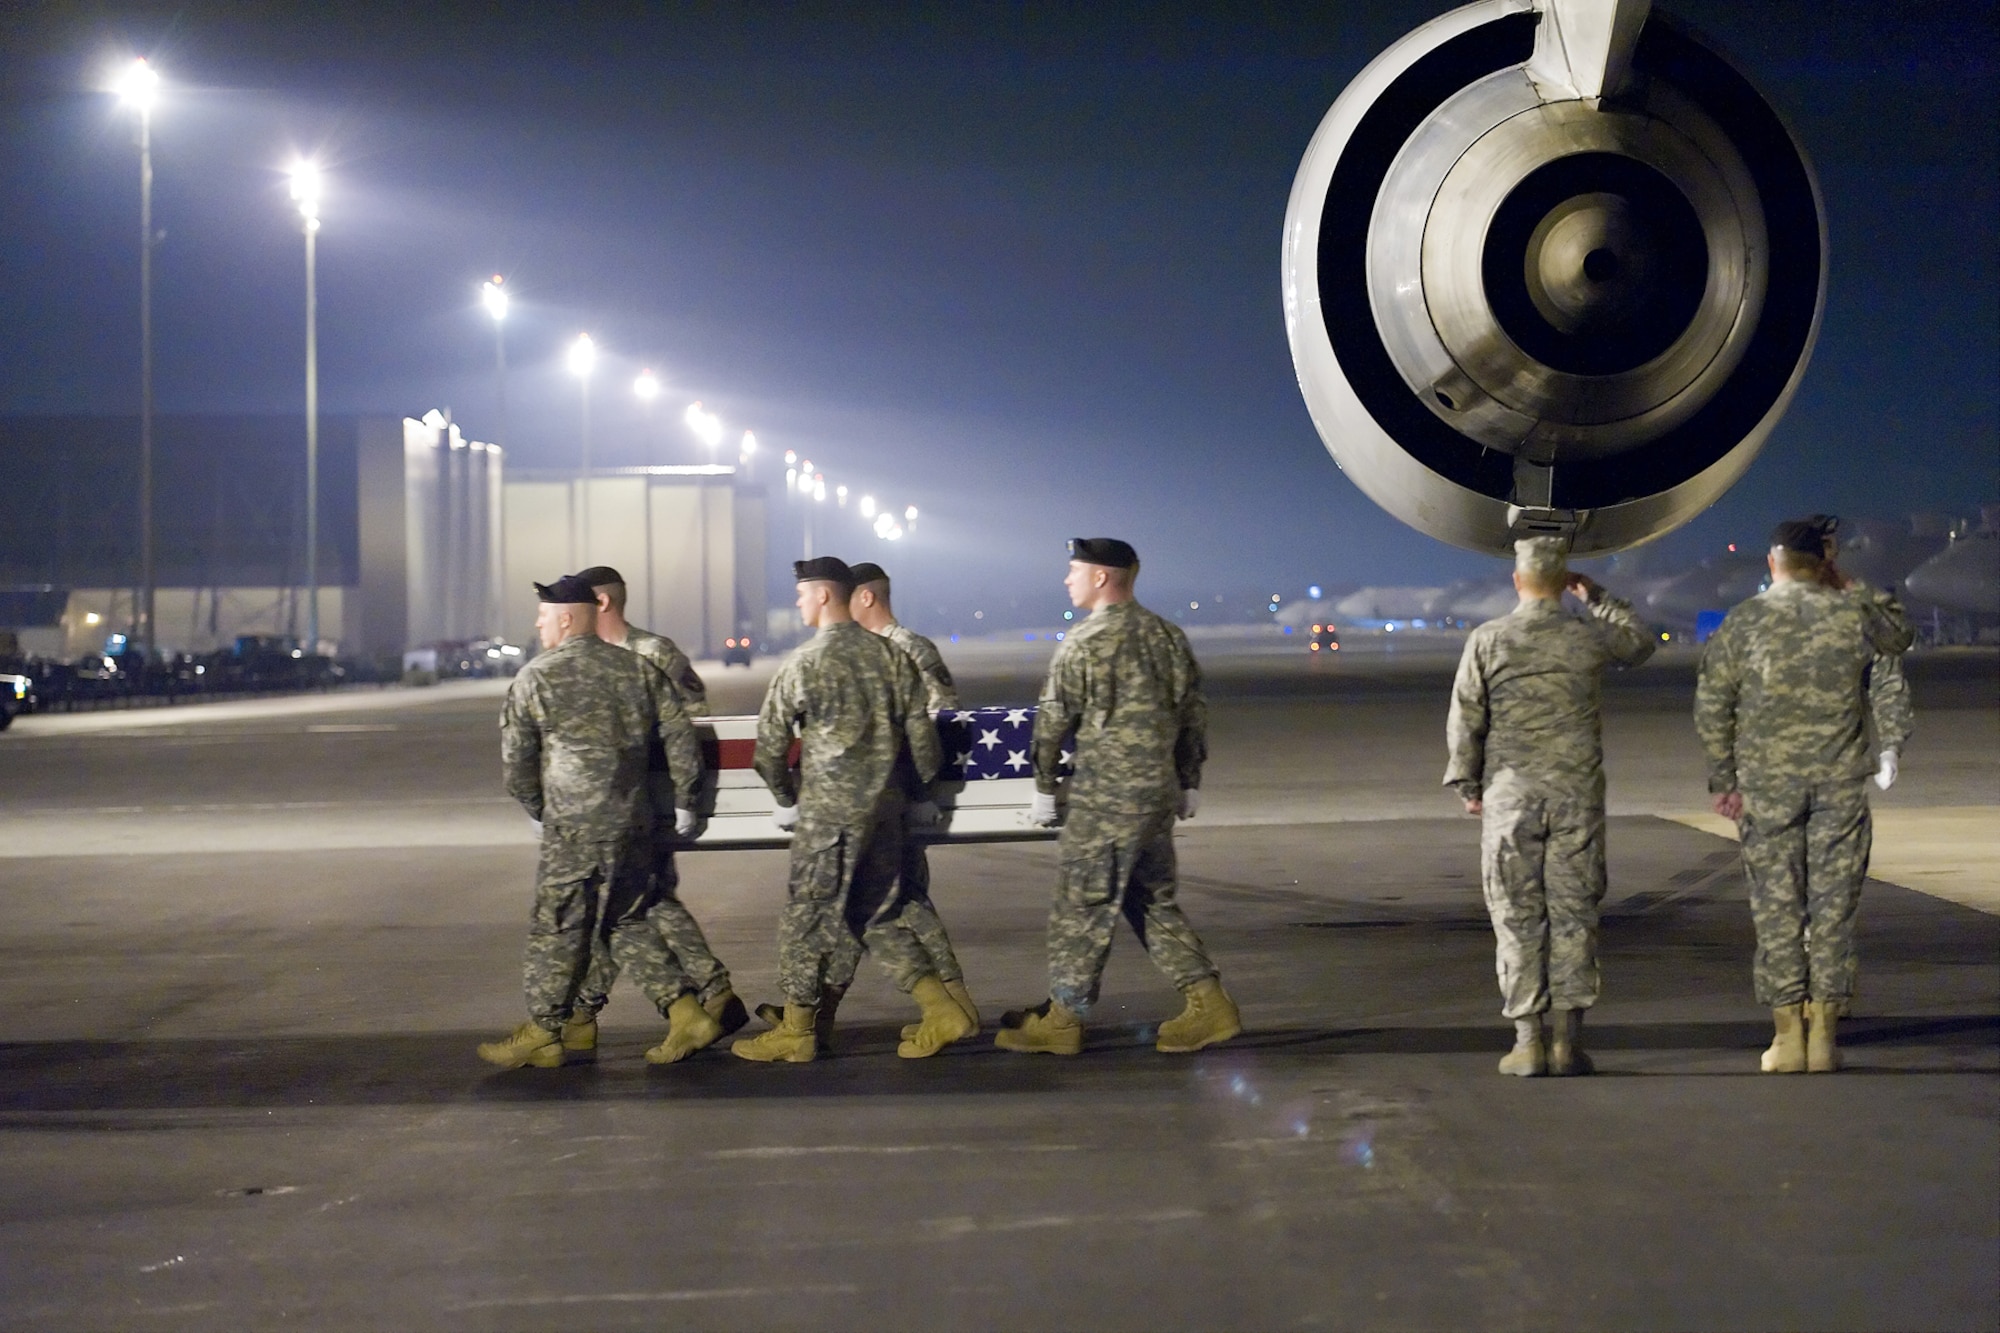 A U.S. Army carry team transfers the remains of Army Sgt. Aaron M. Arthur, of Lake City, S.C., at Dover Air Force Base, Del., March 10. Sgt. Arthur was assigned to 203rd Brigade Support Battalion, attached to the 1st Battalion, 10th Field Artillery Regiment, 3rd Brigade Combat Team, 3rd Infantry Division, Fort Benning, Ga. (U.S. Air Force photo/Roland Balik)